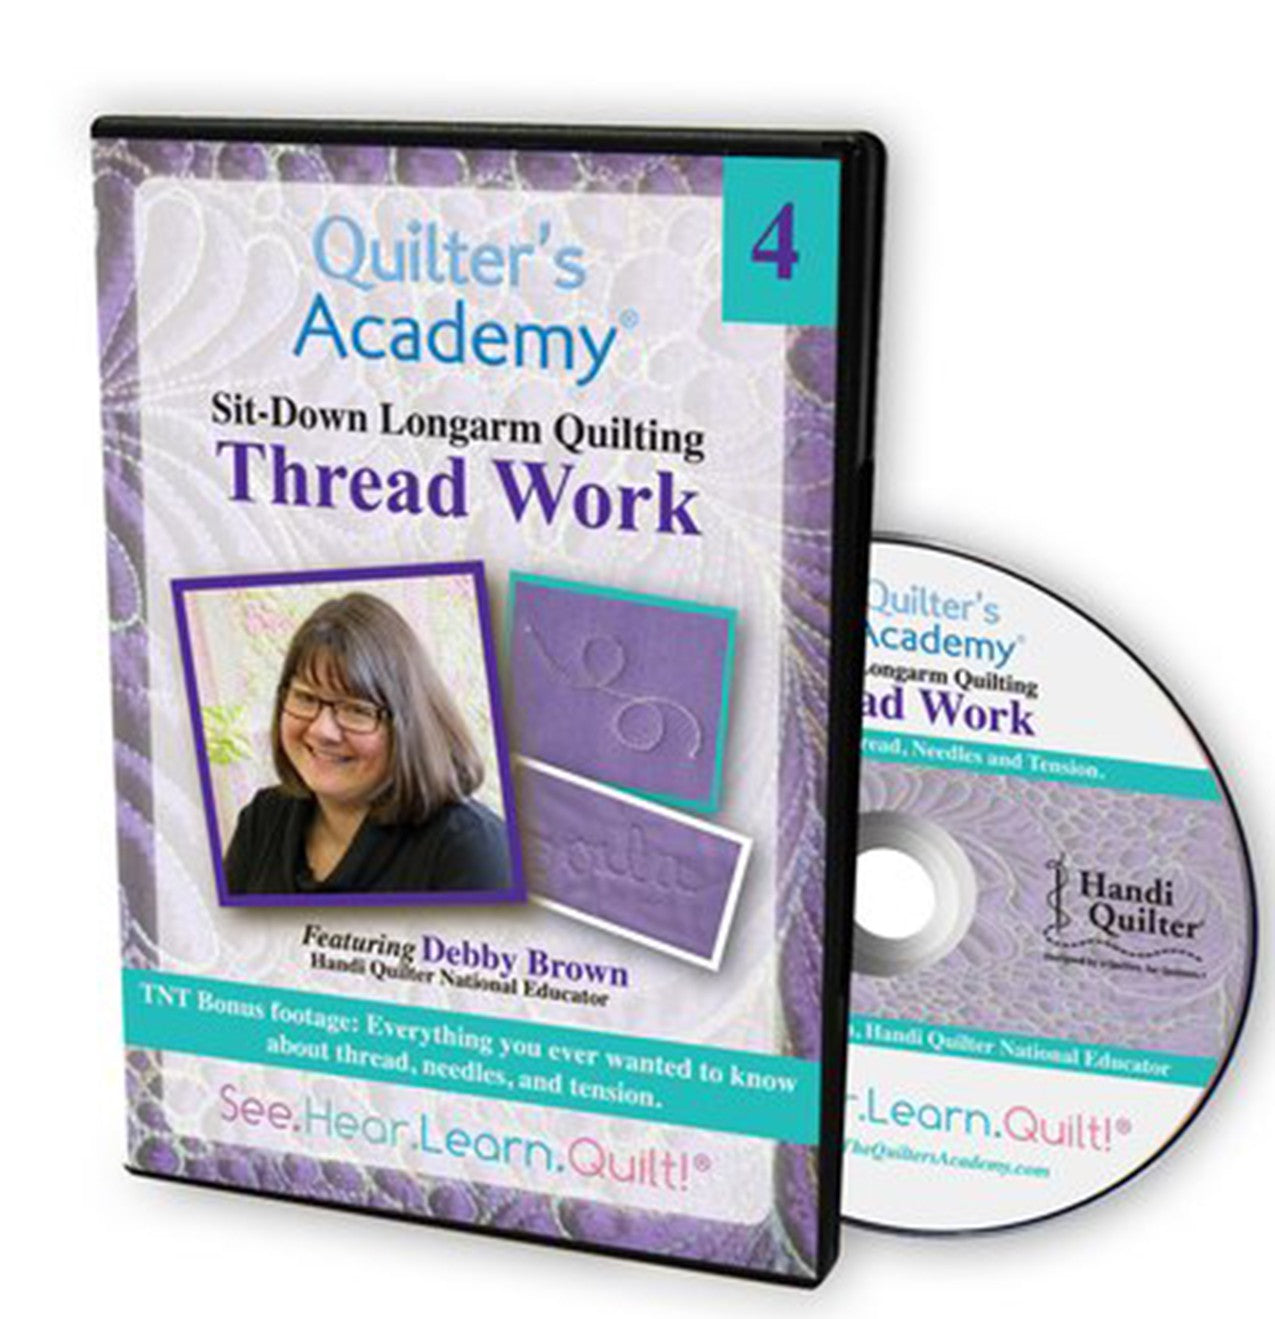 Quilter's Academy Sitdown Longarm Quilting Volume 4 Thread WorkVideo on DVD for Handi Quilter